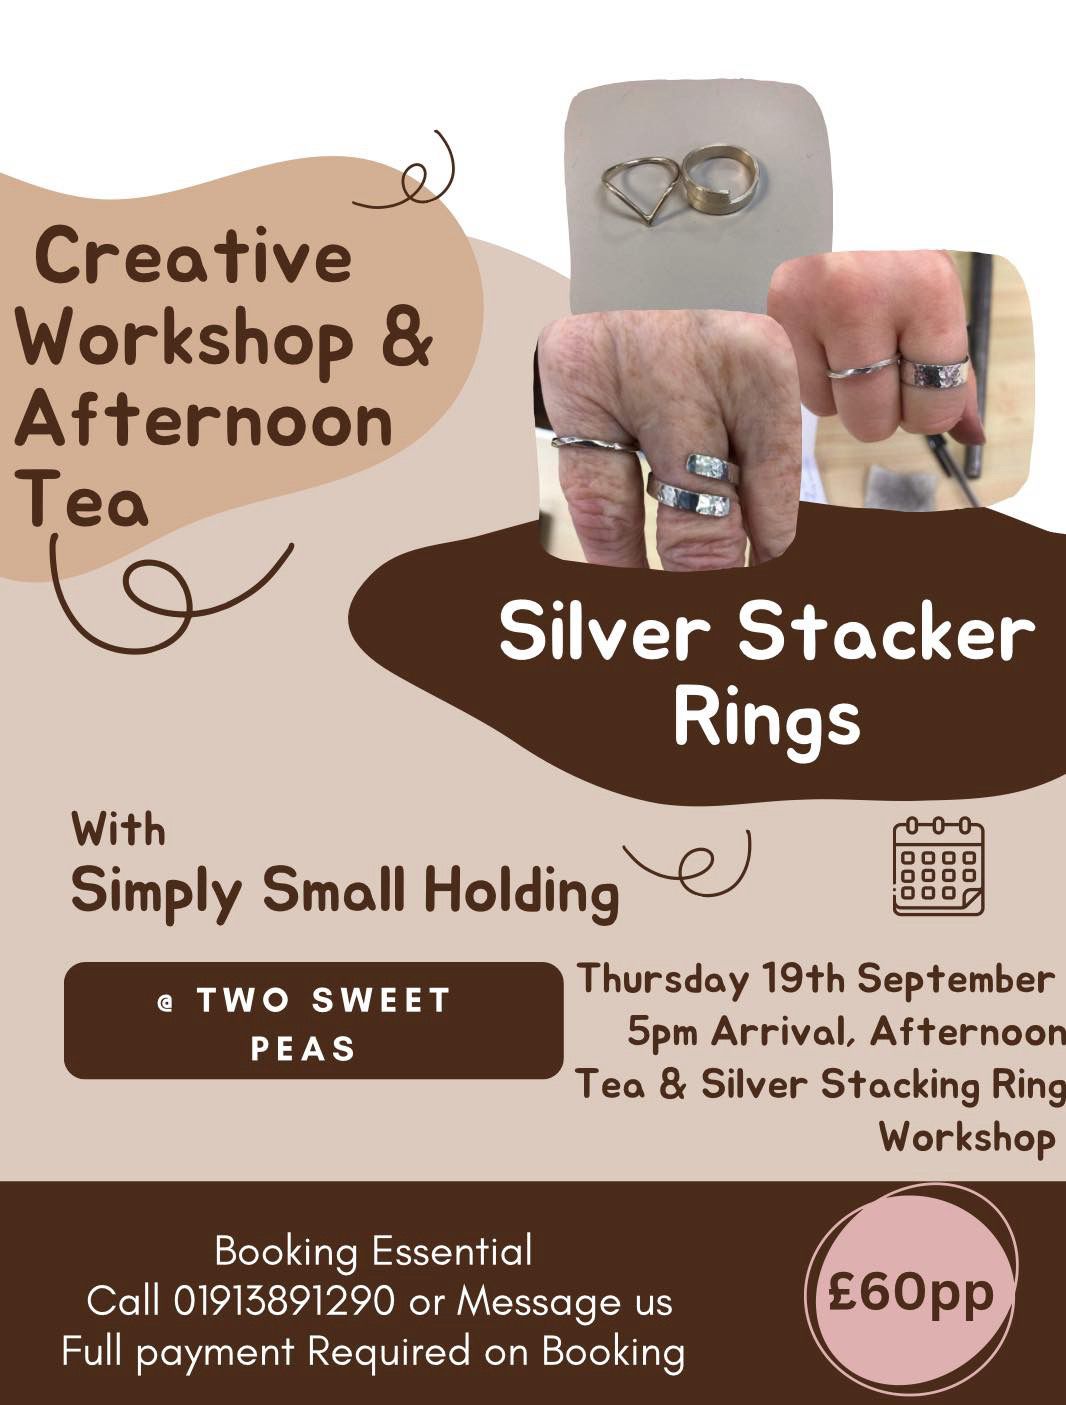 Making Silver Stacking Rings + Afternoon Tea